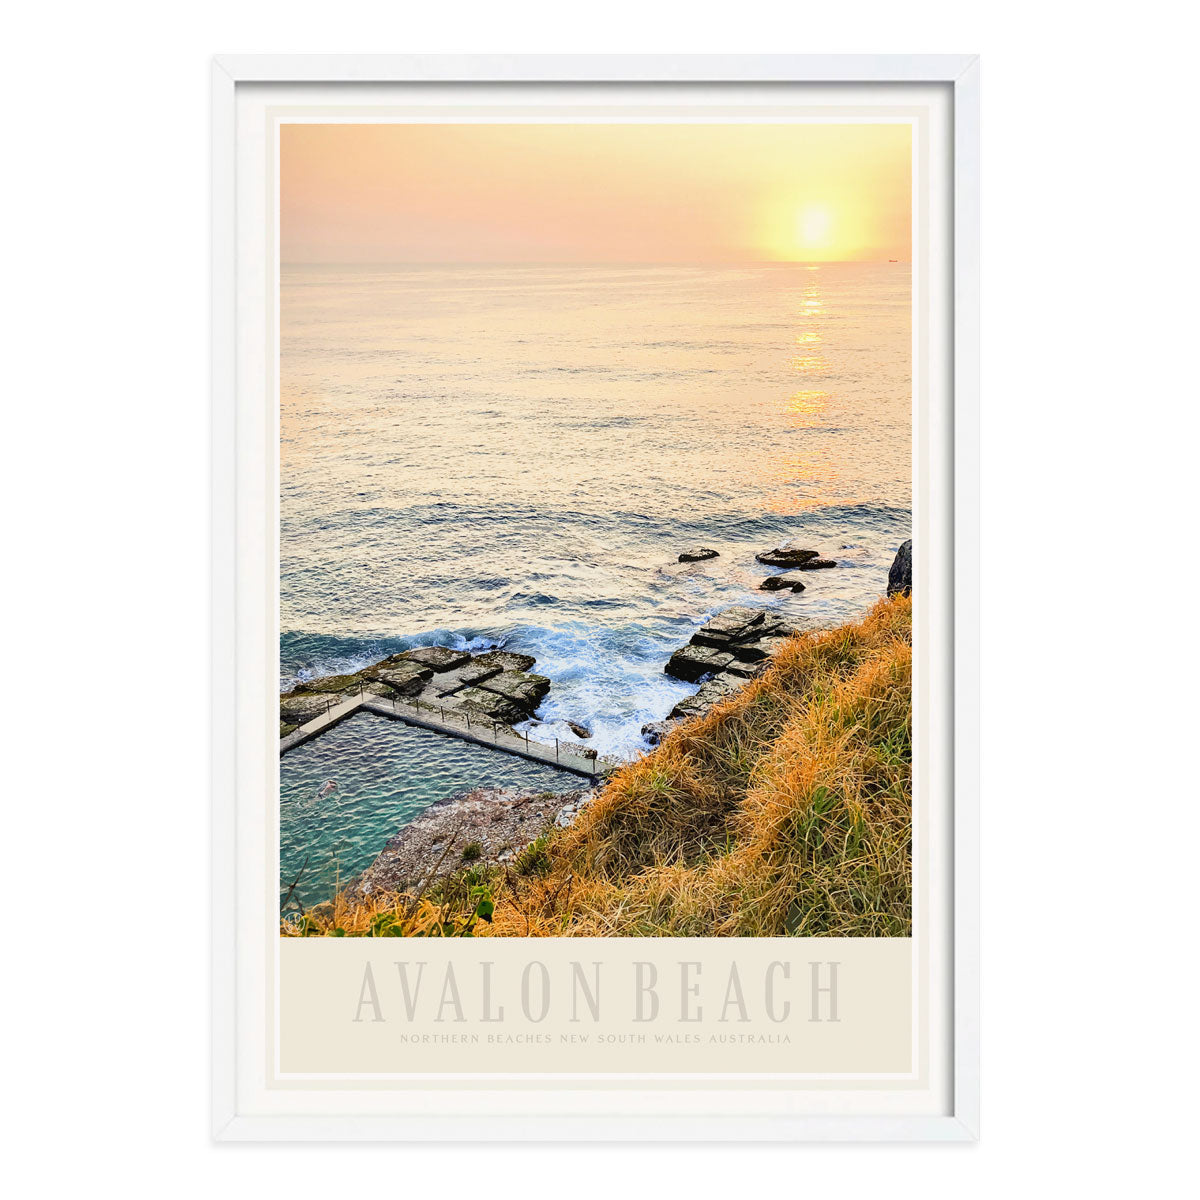 Avalon Beach vintage retro travel poster print in white by Places We Luv